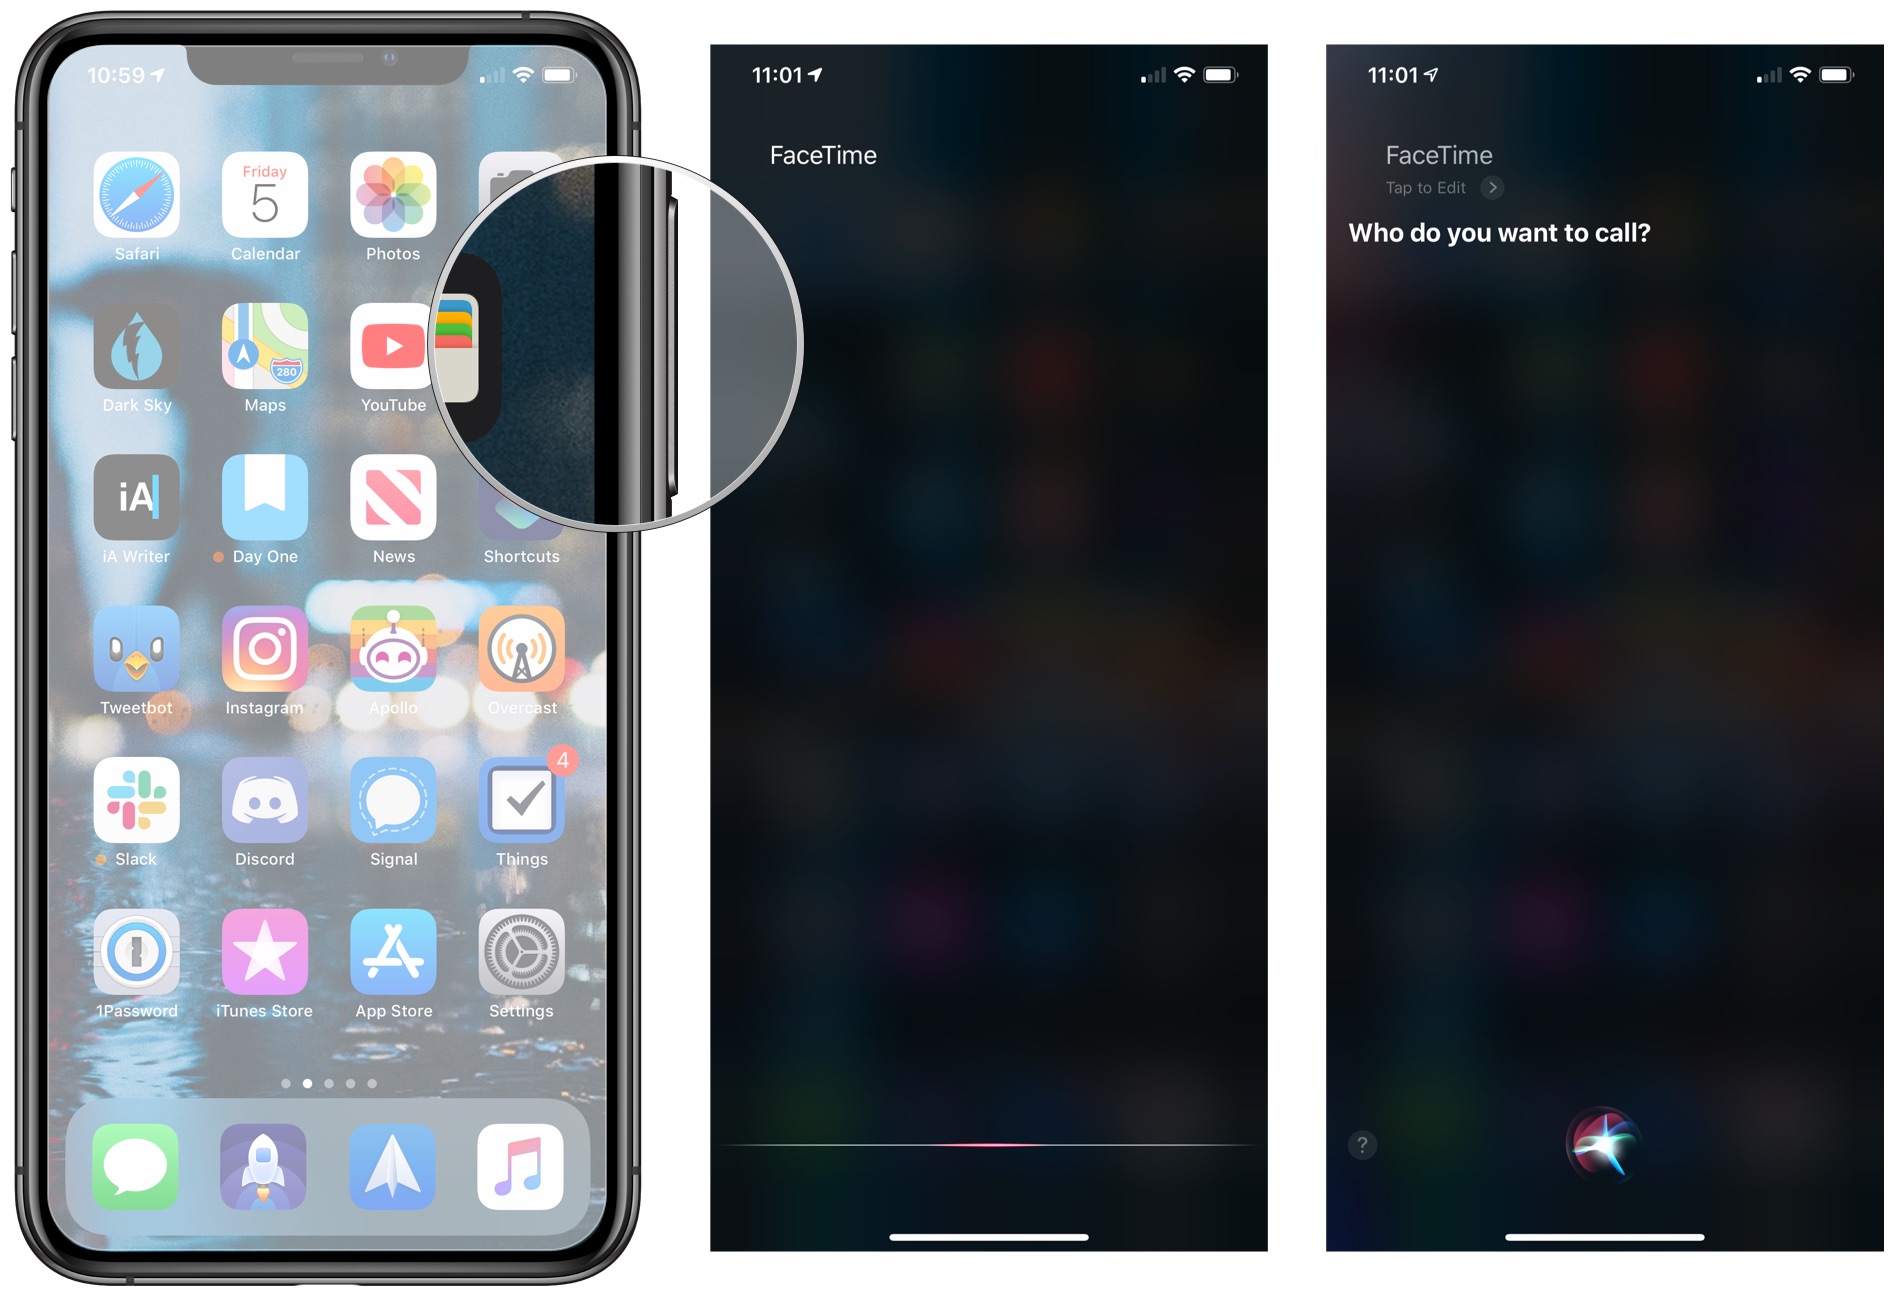 Use Siri to place a FaceTime call, showing how to activate Siri by pressing the Side button, then say FaceTime, followed by the person's name